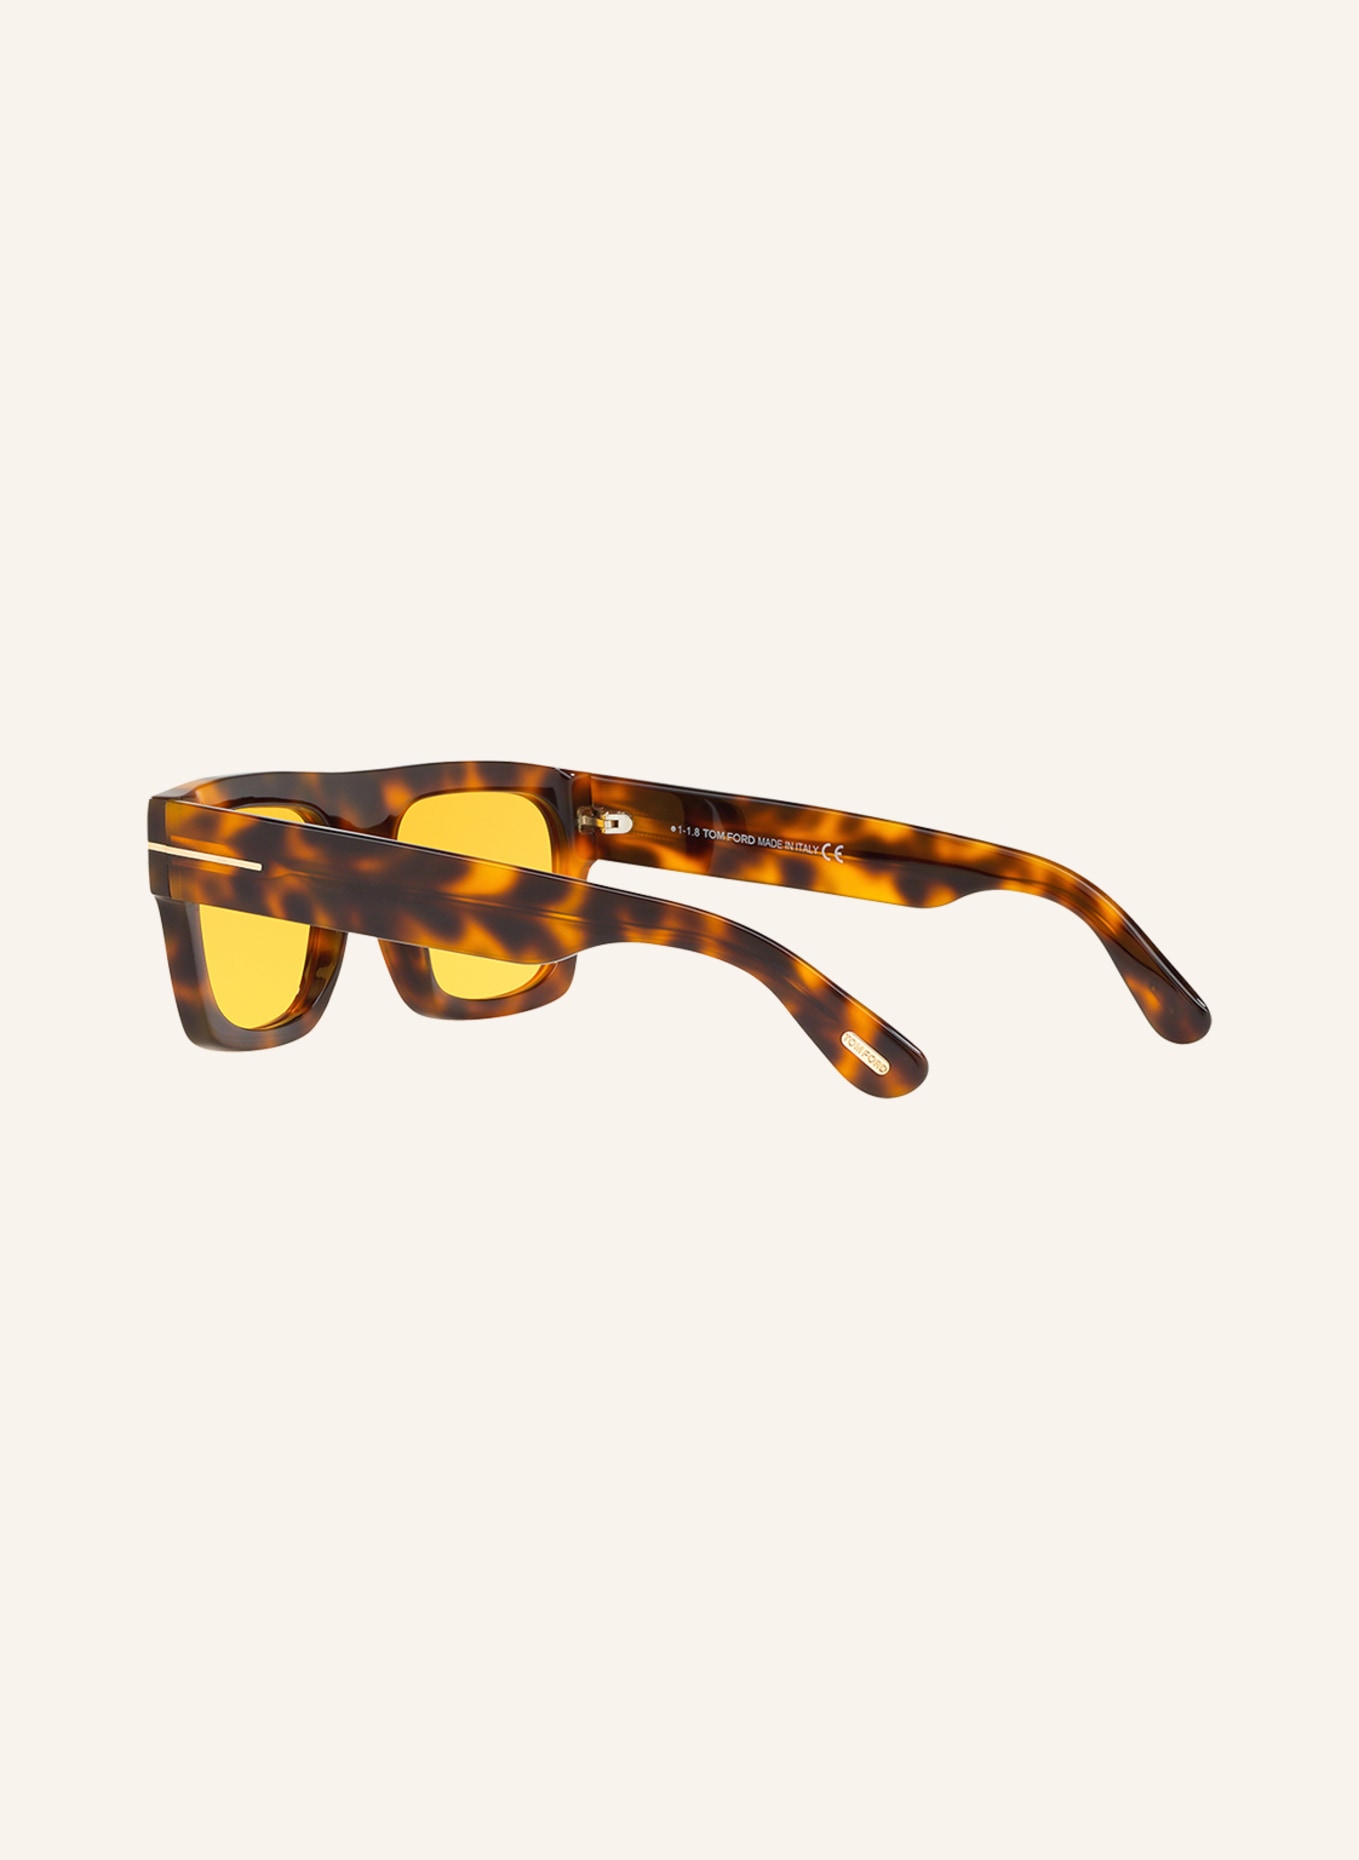 TOM FORD Sunglasses FT0711 FAUSTO, Color: 4402D1 - HAVANA/YELLOW (Image 4)